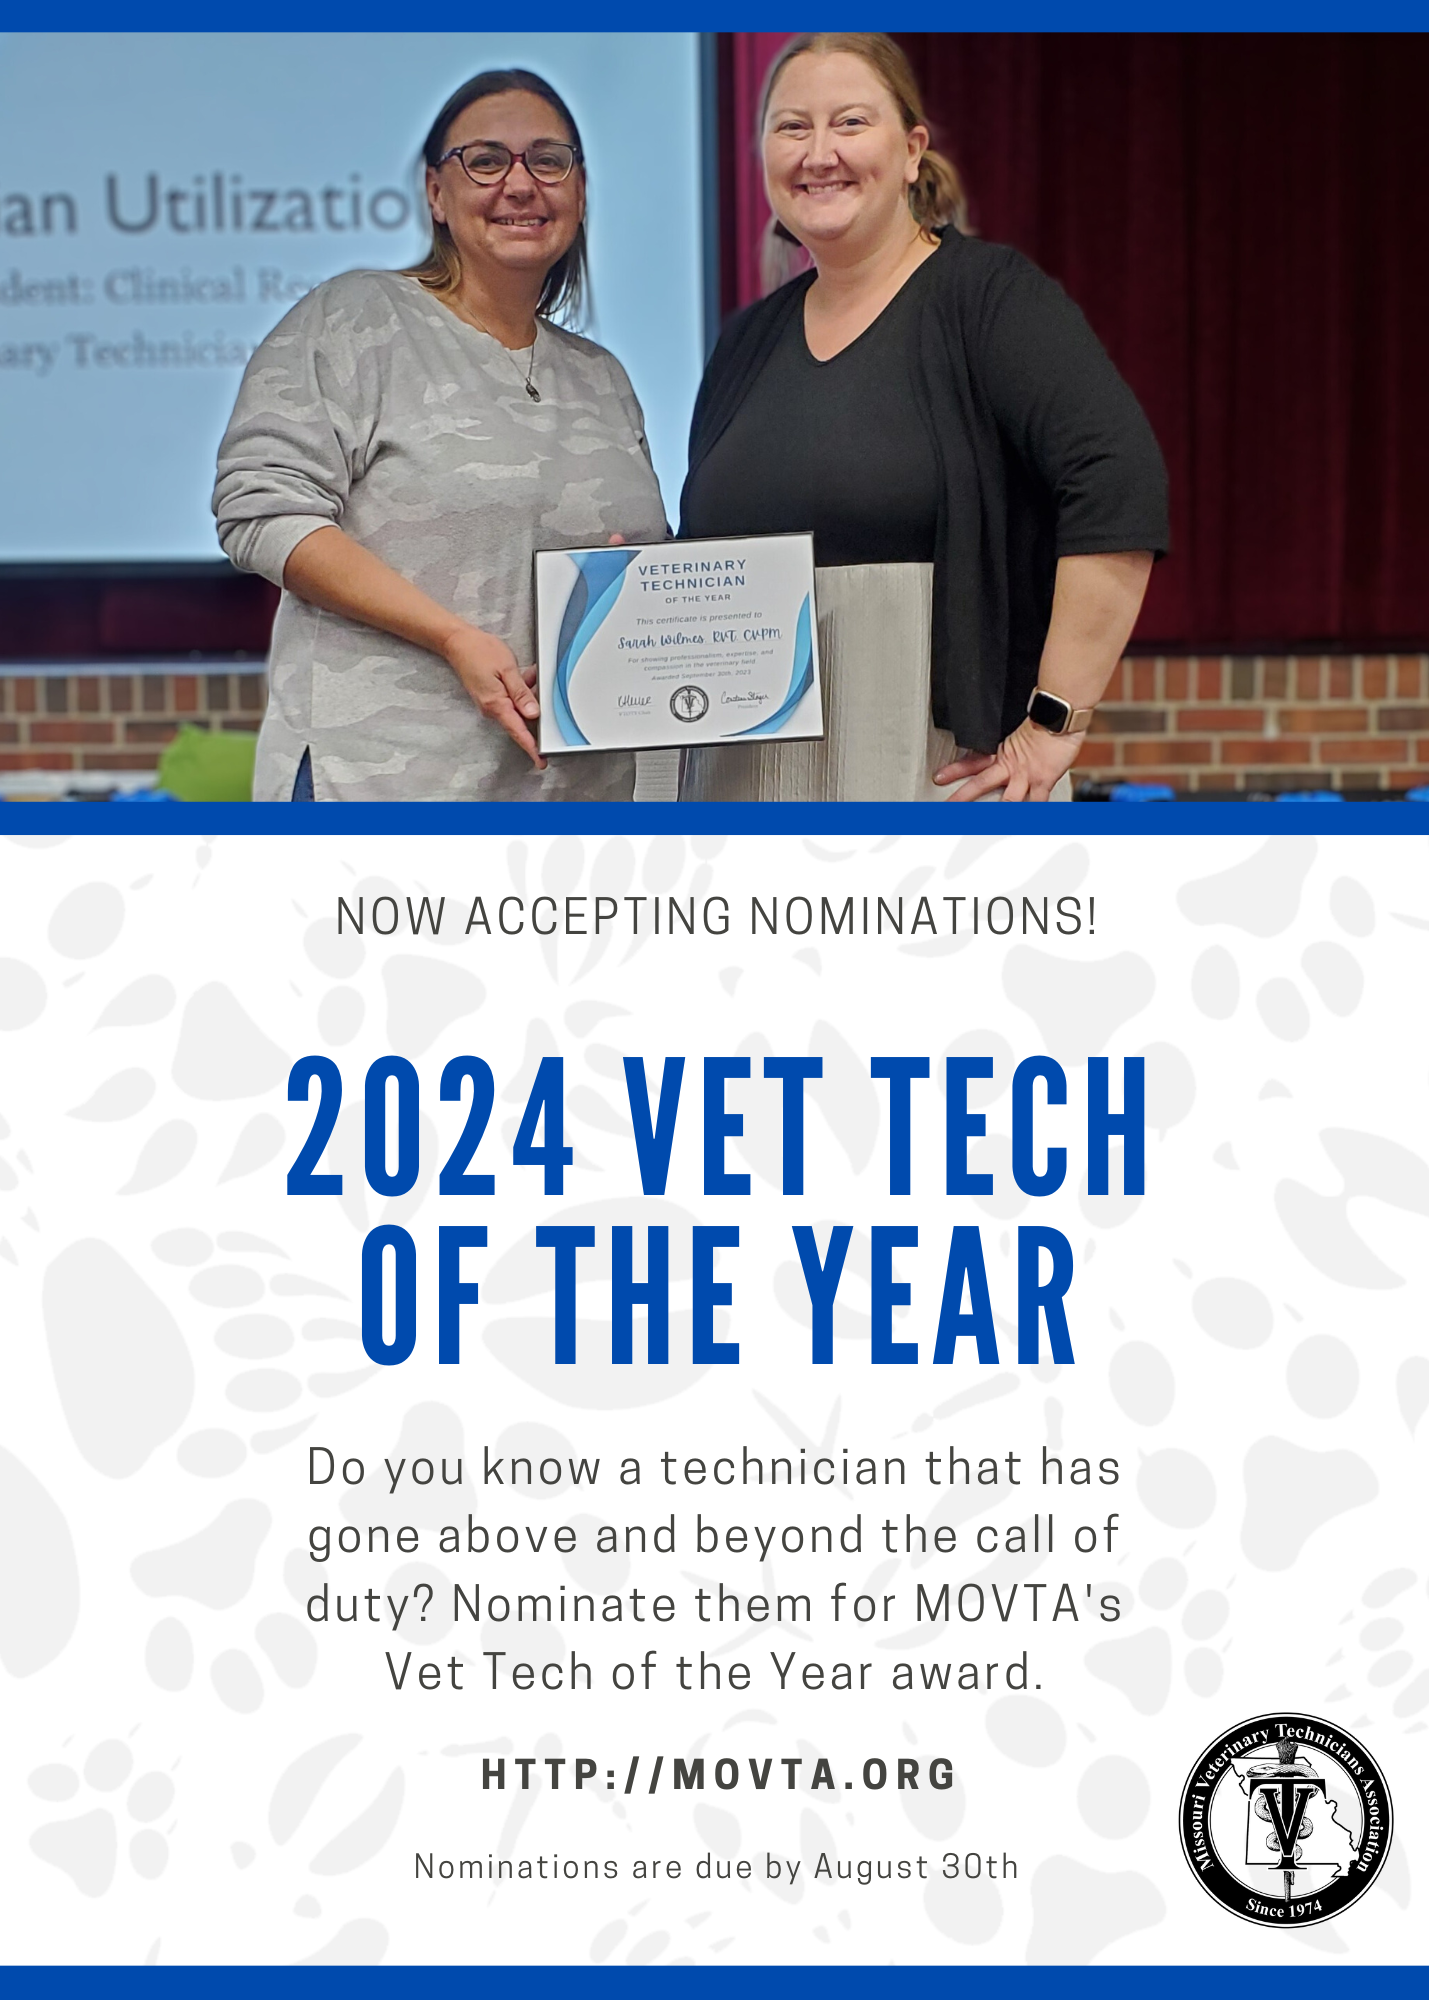 Vet Tech of the Year